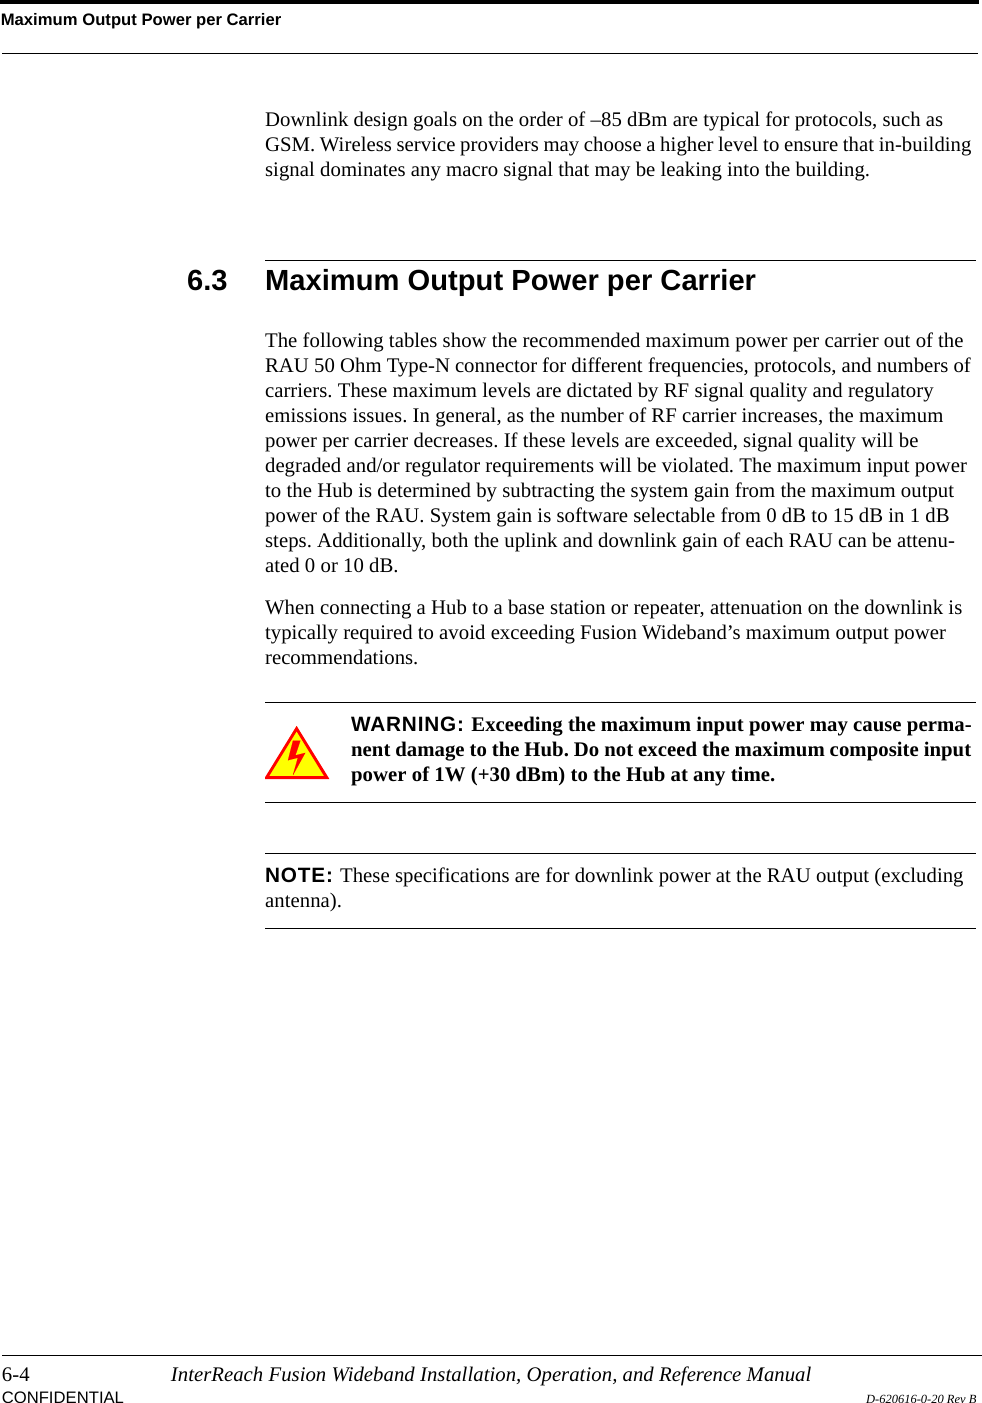 Maximum Output Power per Carrier6-4 InterReach Fusion Wideband Installation, Operation, and Reference ManualCONFIDENTIAL D-620616-0-20 Rev BDownlink design goals on the order of –85 dBm are typical for protocols, such as GSM. Wireless service providers may choose a higher level to ensure that in-building signal dominates any macro signal that may be leaking into the building.6.3 Maximum Output Power per CarrierThe following tables show the recommended maximum power per carrier out of the RAU 50 Ohm Type-N connector for different frequencies, protocols, and numbers of carriers. These maximum levels are dictated by RF signal quality and regulatory emissions issues. In general, as the number of RF carrier increases, the maximum power per carrier decreases. If these levels are exceeded, signal quality will be degraded and/or regulator requirements will be violated. The maximum input power to the Hub is determined by subtracting the system gain from the maximum output power of the RAU. System gain is software selectable from 0 dB to 15 dB in 1 dB steps. Additionally, both the uplink and downlink gain of each RAU can be attenu-ated 0 or 10 dB.When connecting a Hub to a base station or repeater, attenuation on the downlink is typically required to avoid exceeding Fusion Wideband’s maximum output power recommendations.WARNING: Exceeding the maximum input power may cause perma-nent damage to the Hub. Do not exceed the maximum composite input power of 1W (+30 dBm) to the Hub at any time.NOTE: These specifications are for downlink power at the RAU output (excluding antenna).